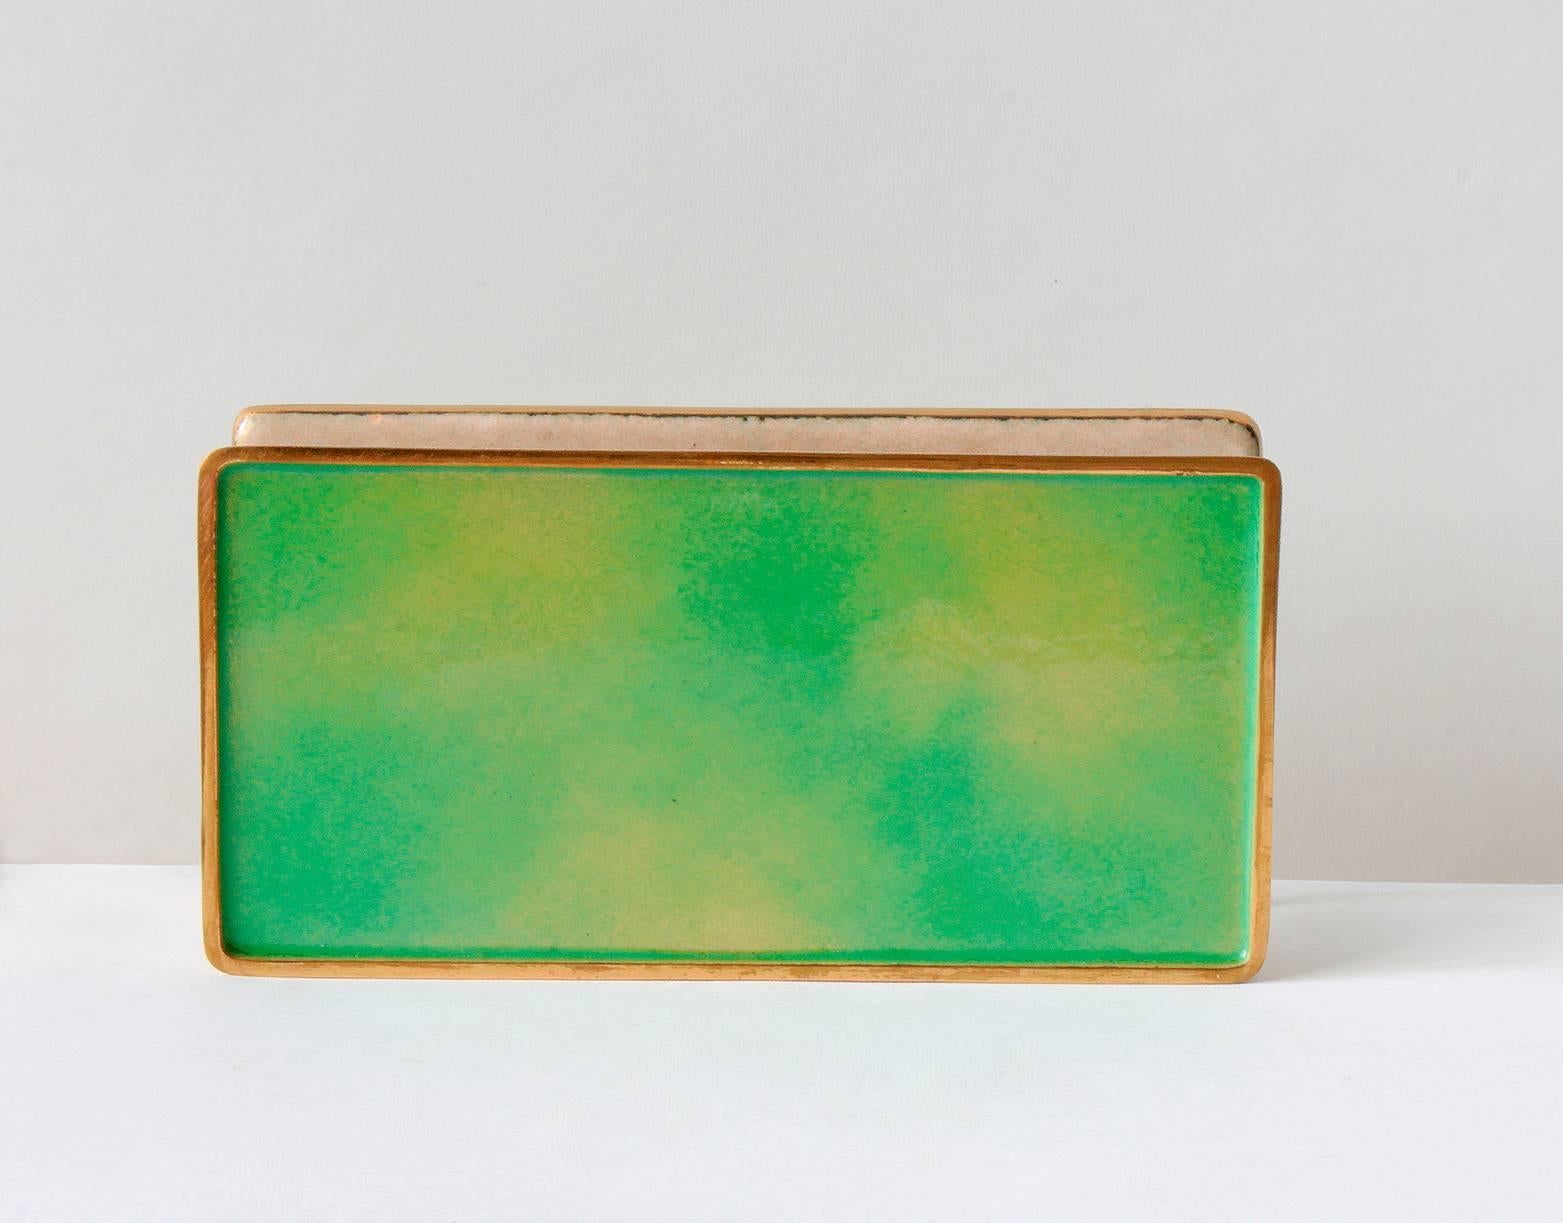 Mid-Century Modern Gio Ponti Door Handles with Hand-Polished Enamel on Brass by Paolo De Poli